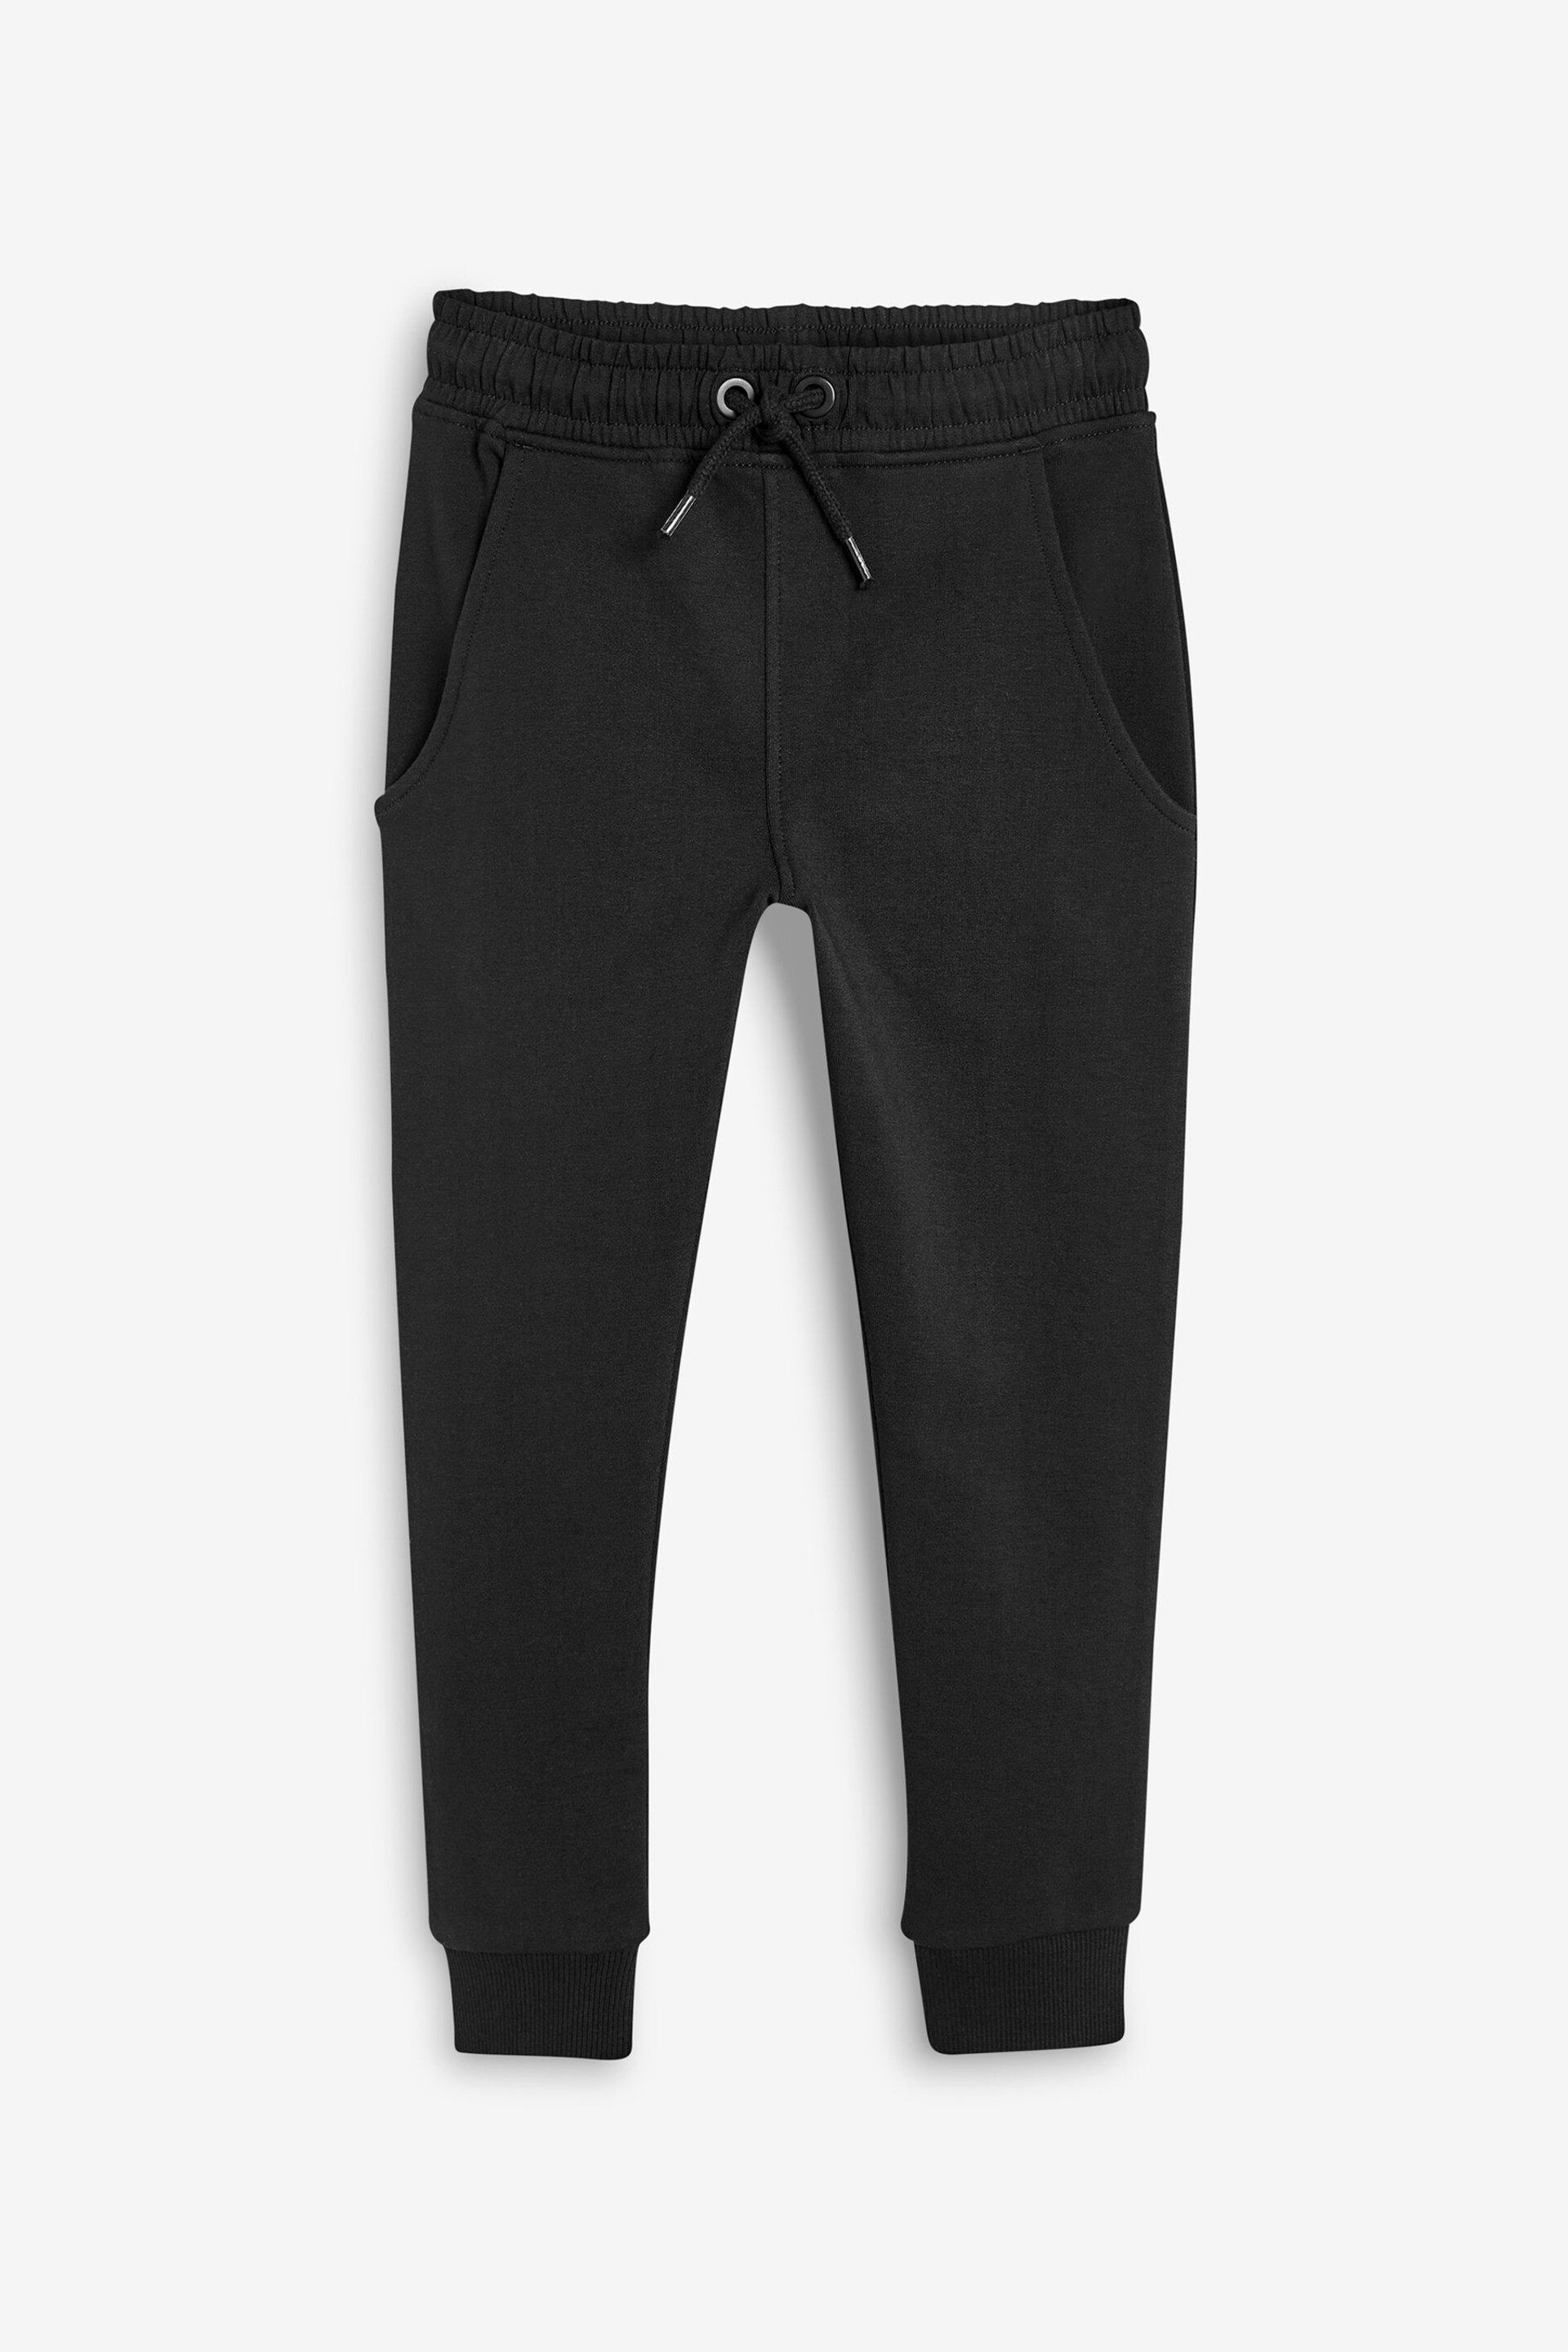 Black Skinny Fit Joggers (3-16yrs) - Image 5 of 7